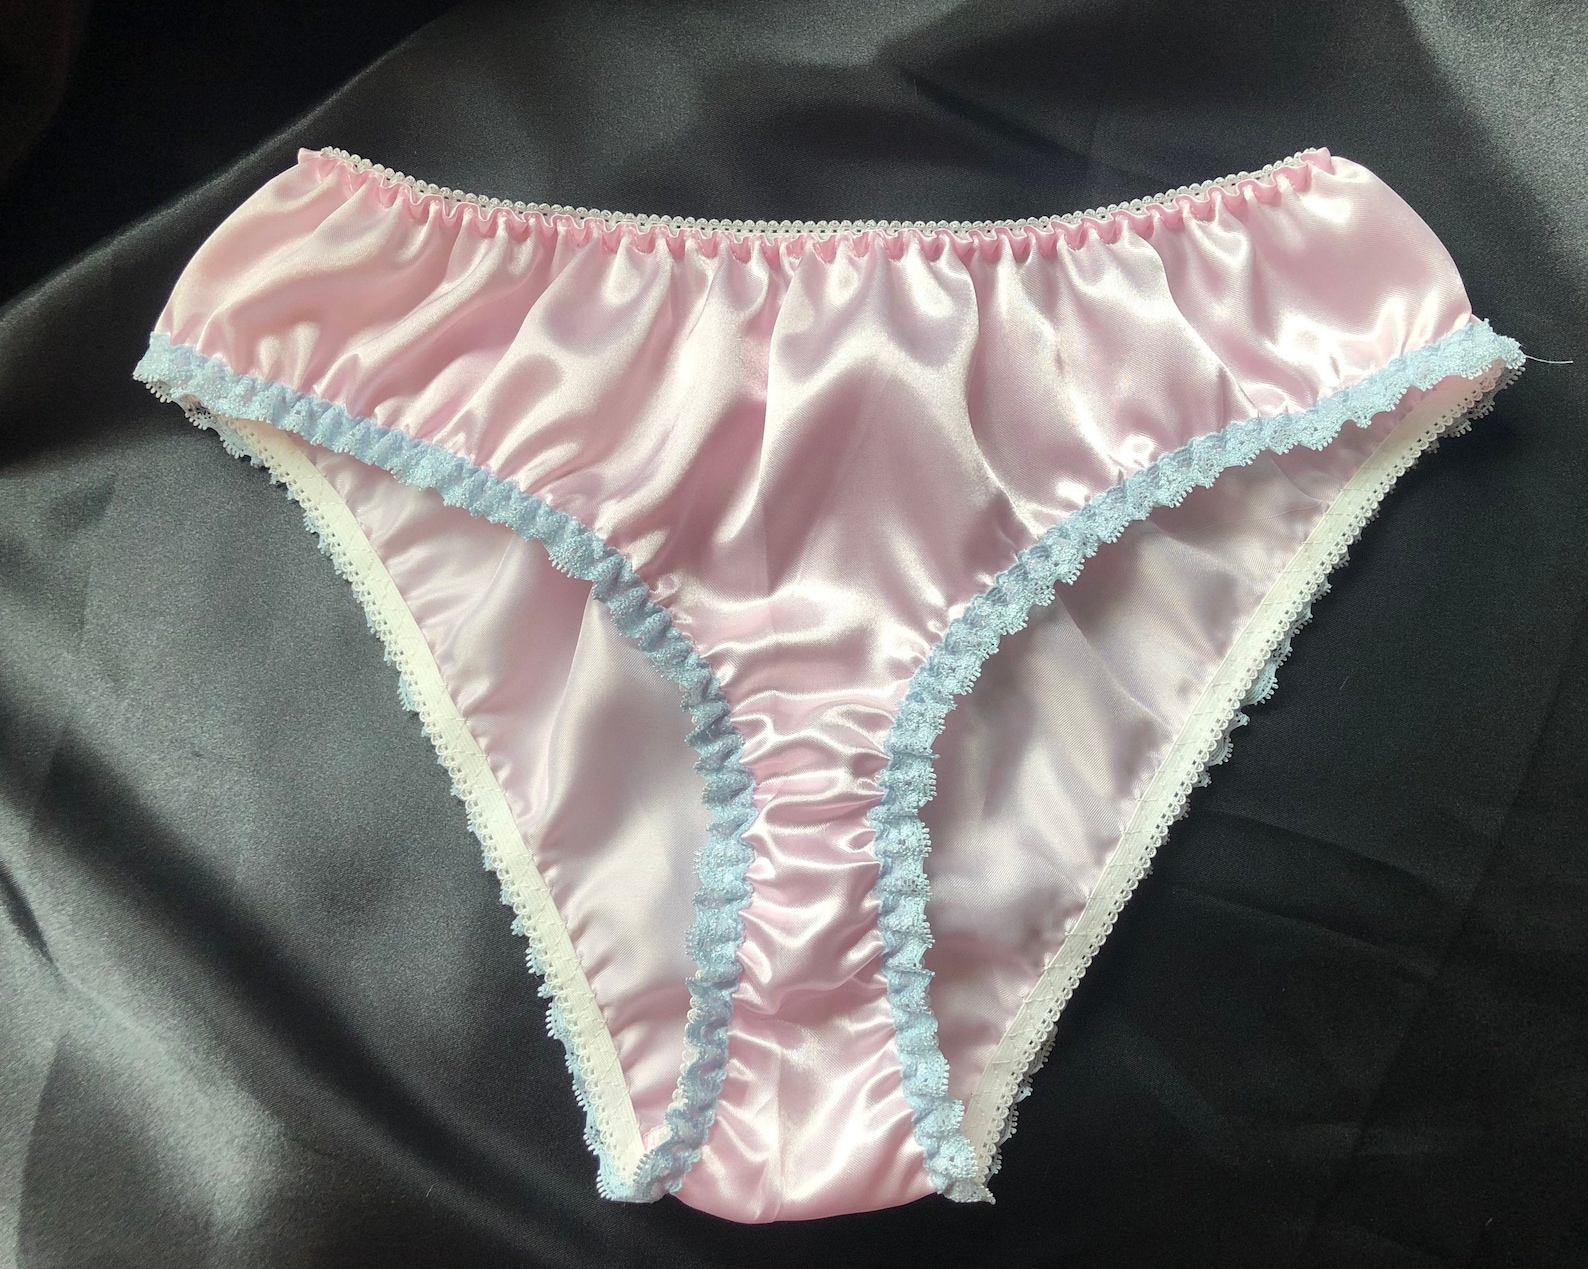 Pink satin sissy panties Thong with lace trim for men all | Etsy